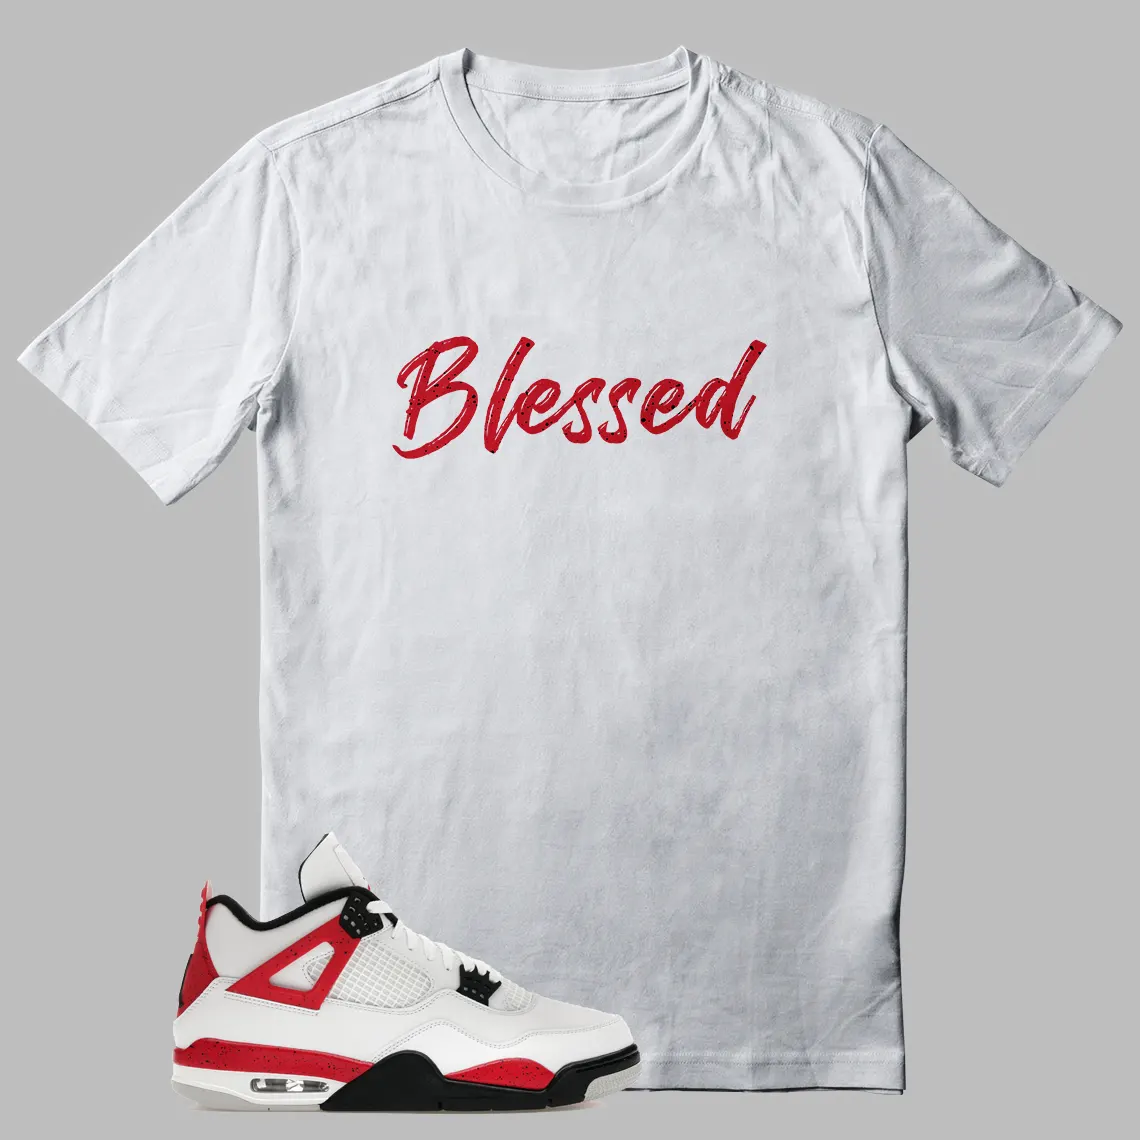 Jordan 4 Red Cement T-shirt Blessed Graphic